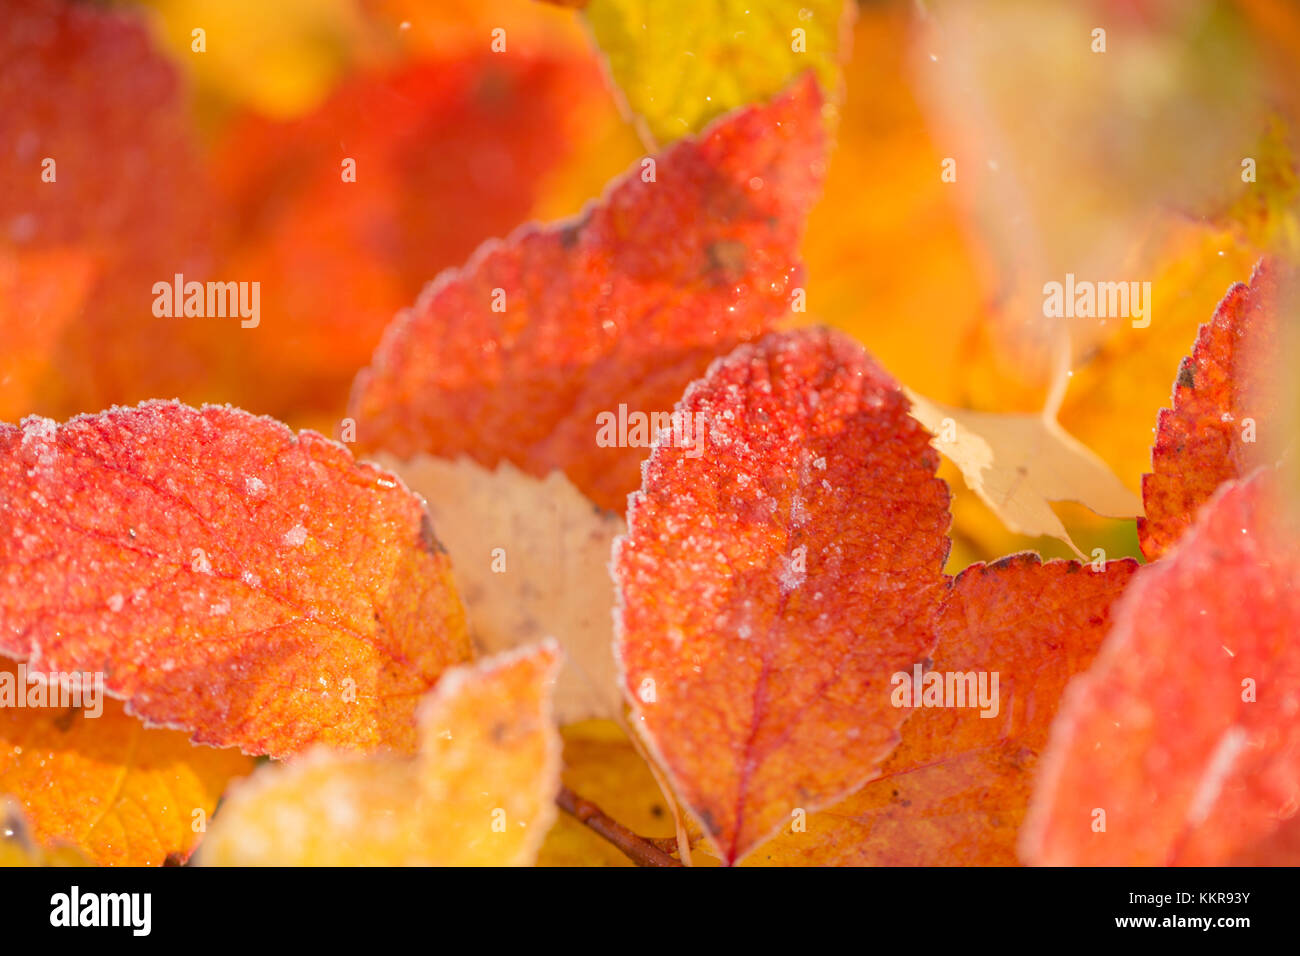 Orange frost leaves on natural background, bright color Stock Photo